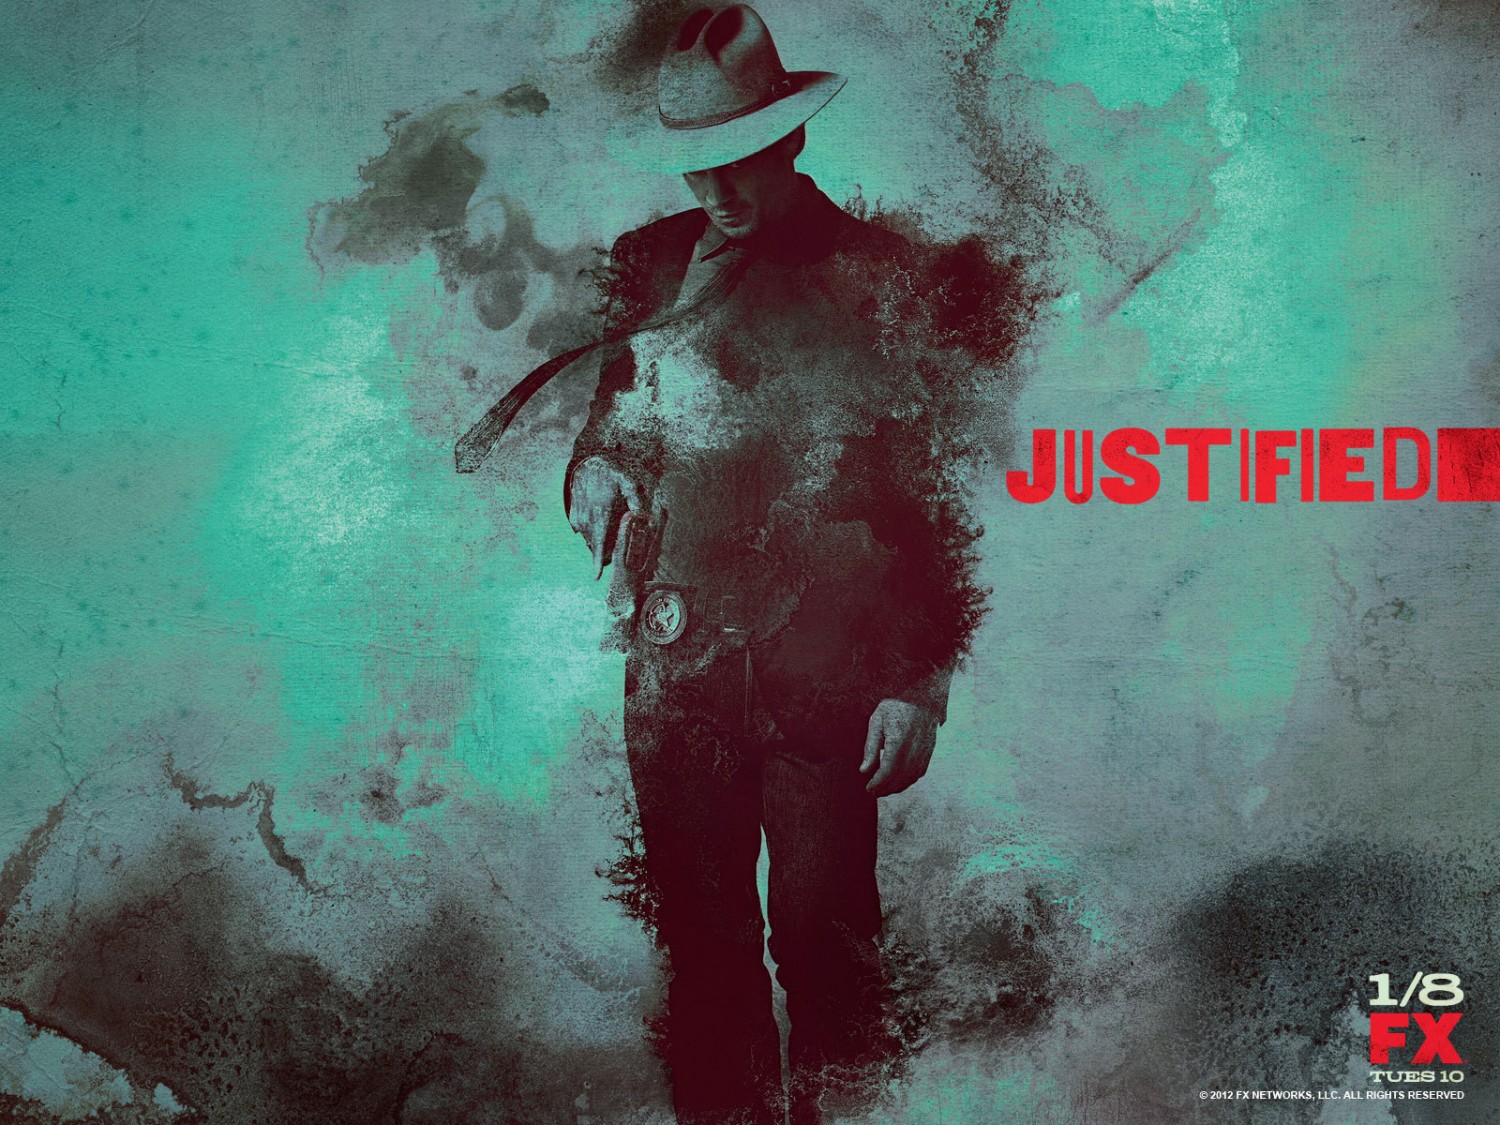 Extra Large TV Poster Image for Justified (#7 of 12)